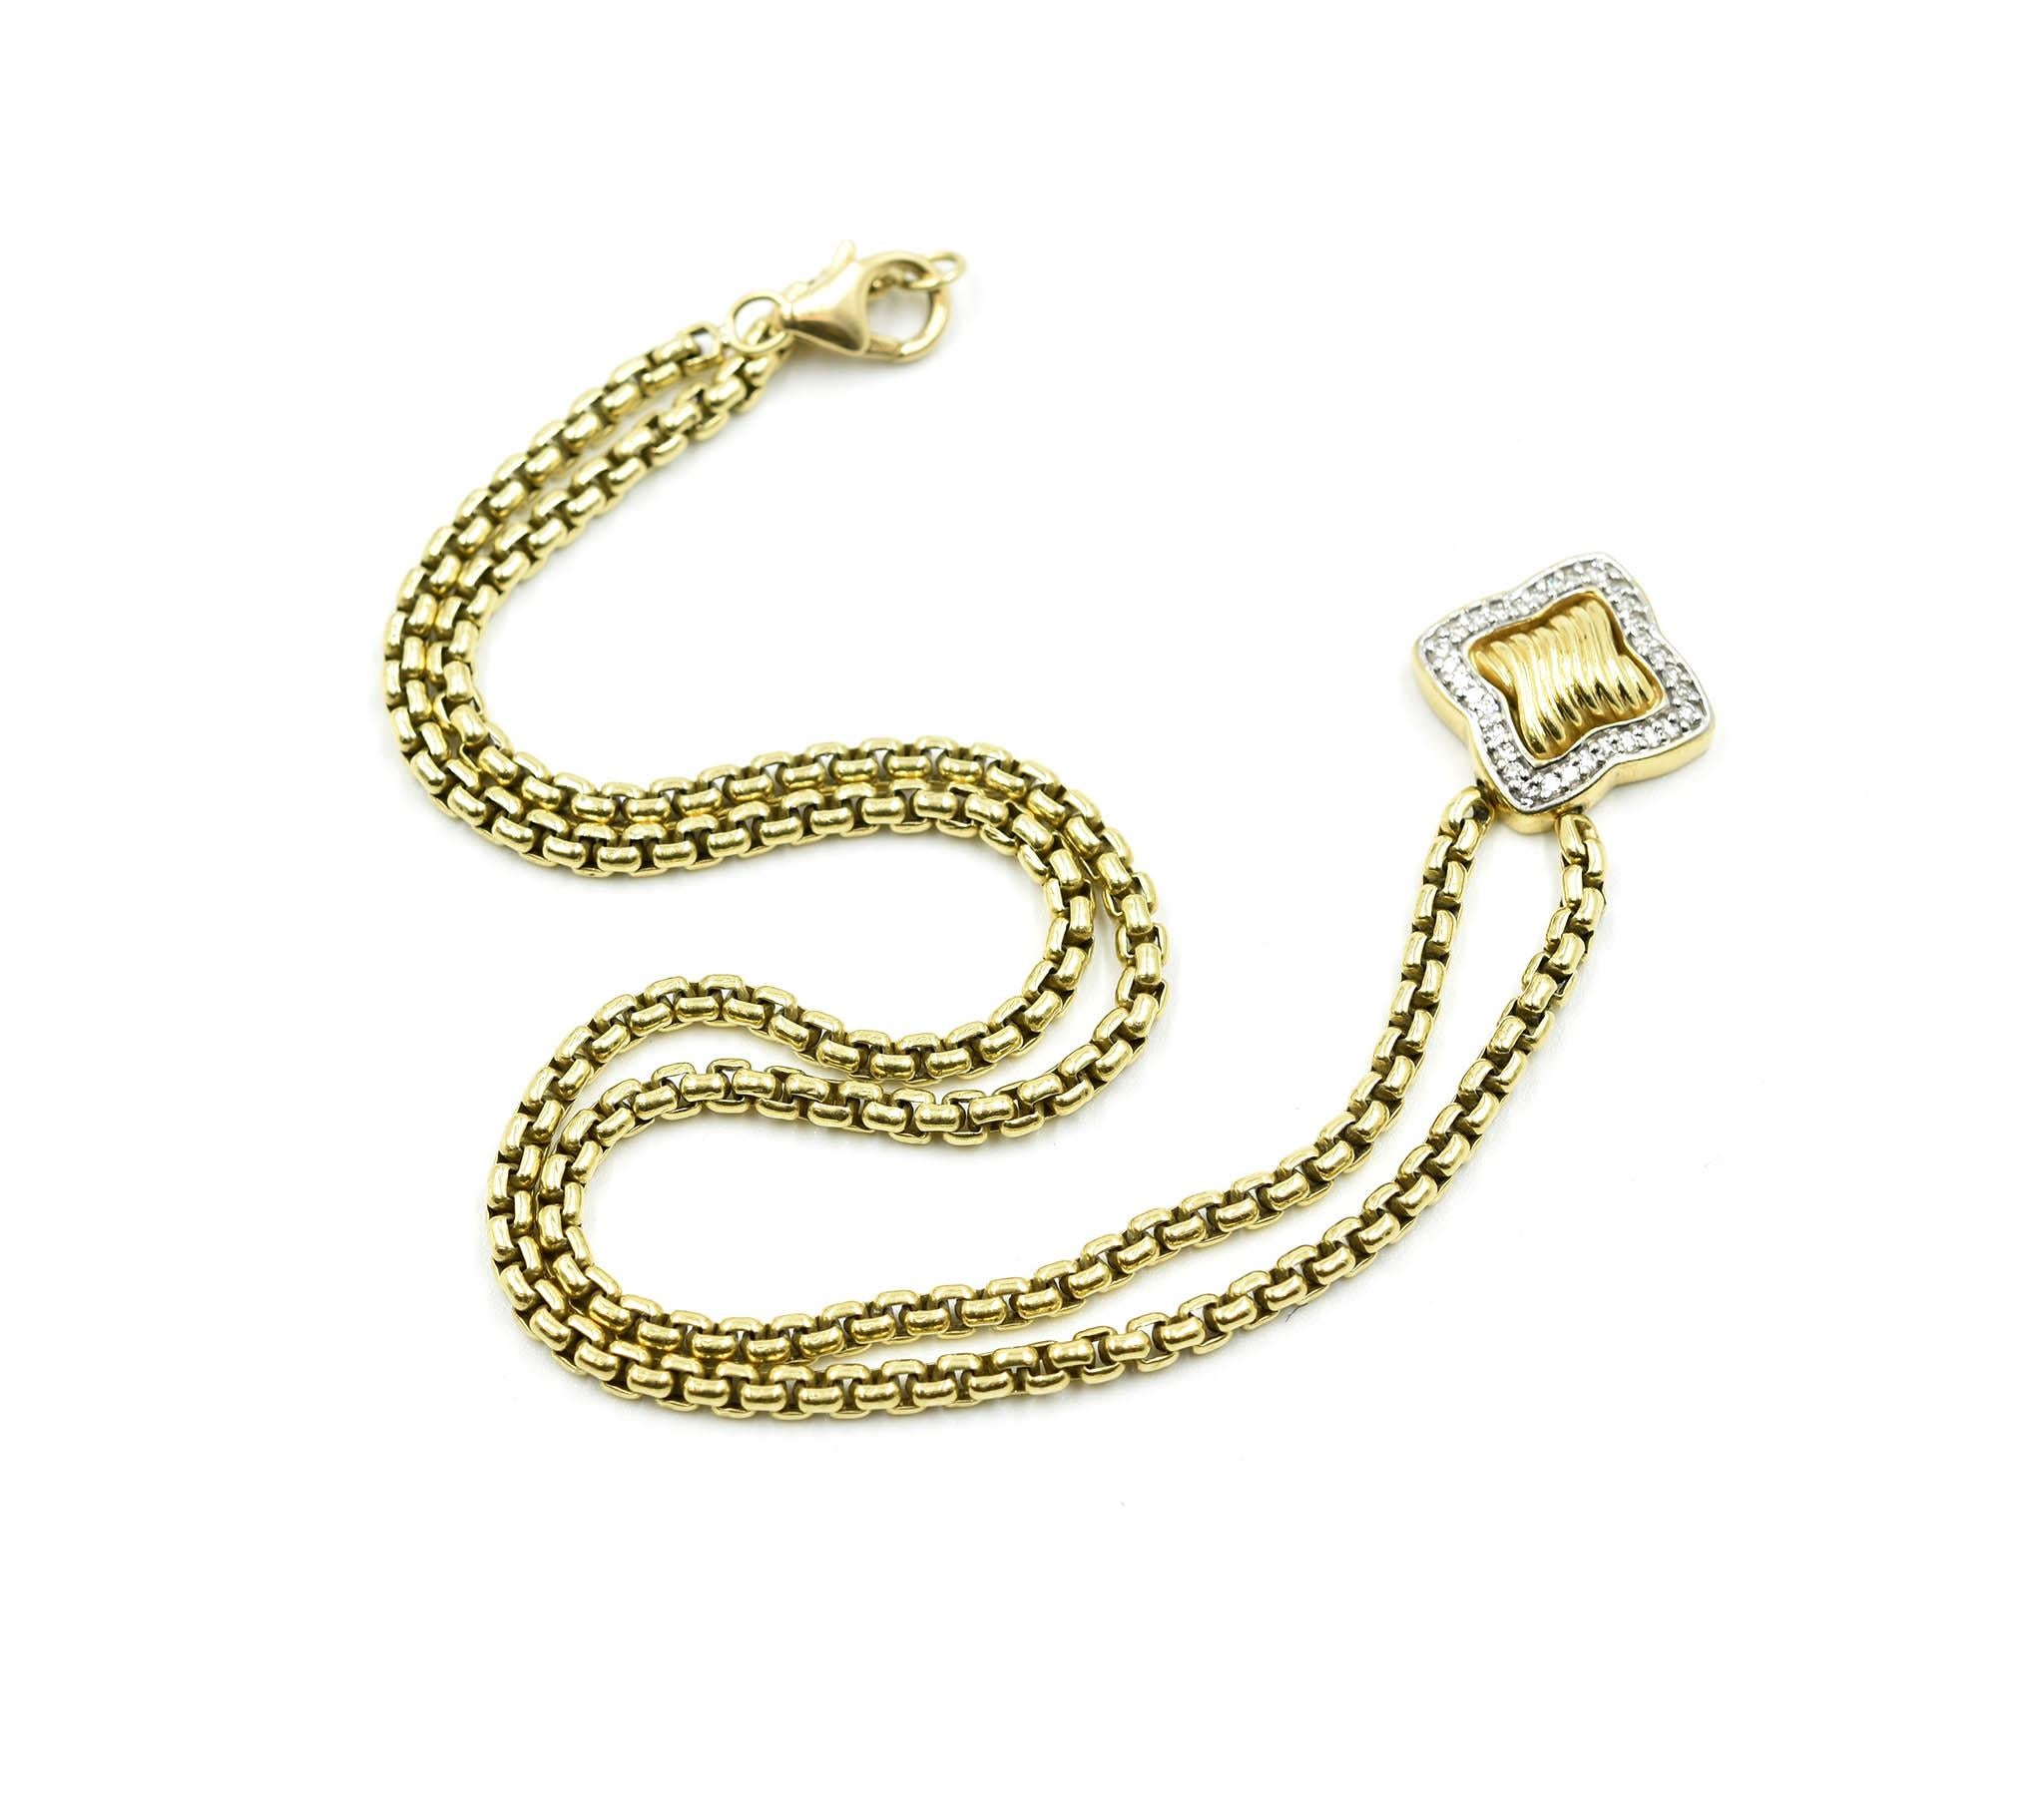 This David Yurman necklace consists of 18k yellow gold links and 31 diamonds. The links on the necklace are box shaped and measure 2.72mm in diameter. Featured on the necklace is a square shaped pendant with a beautiful diamond border. The 31 round